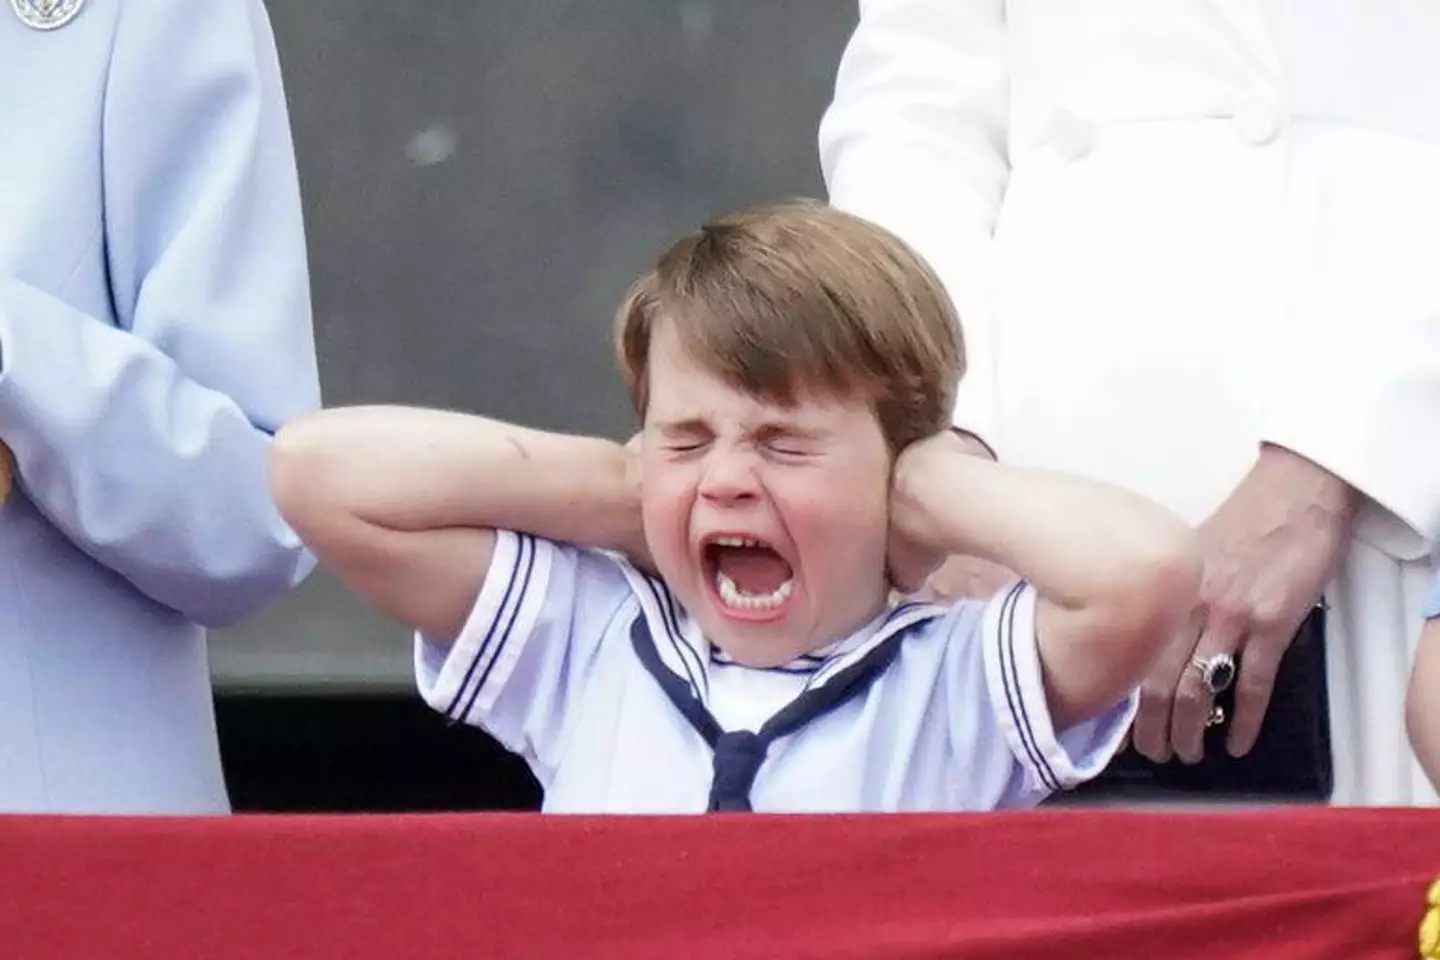 Prince Louis has become well known for his hilarious public antics.